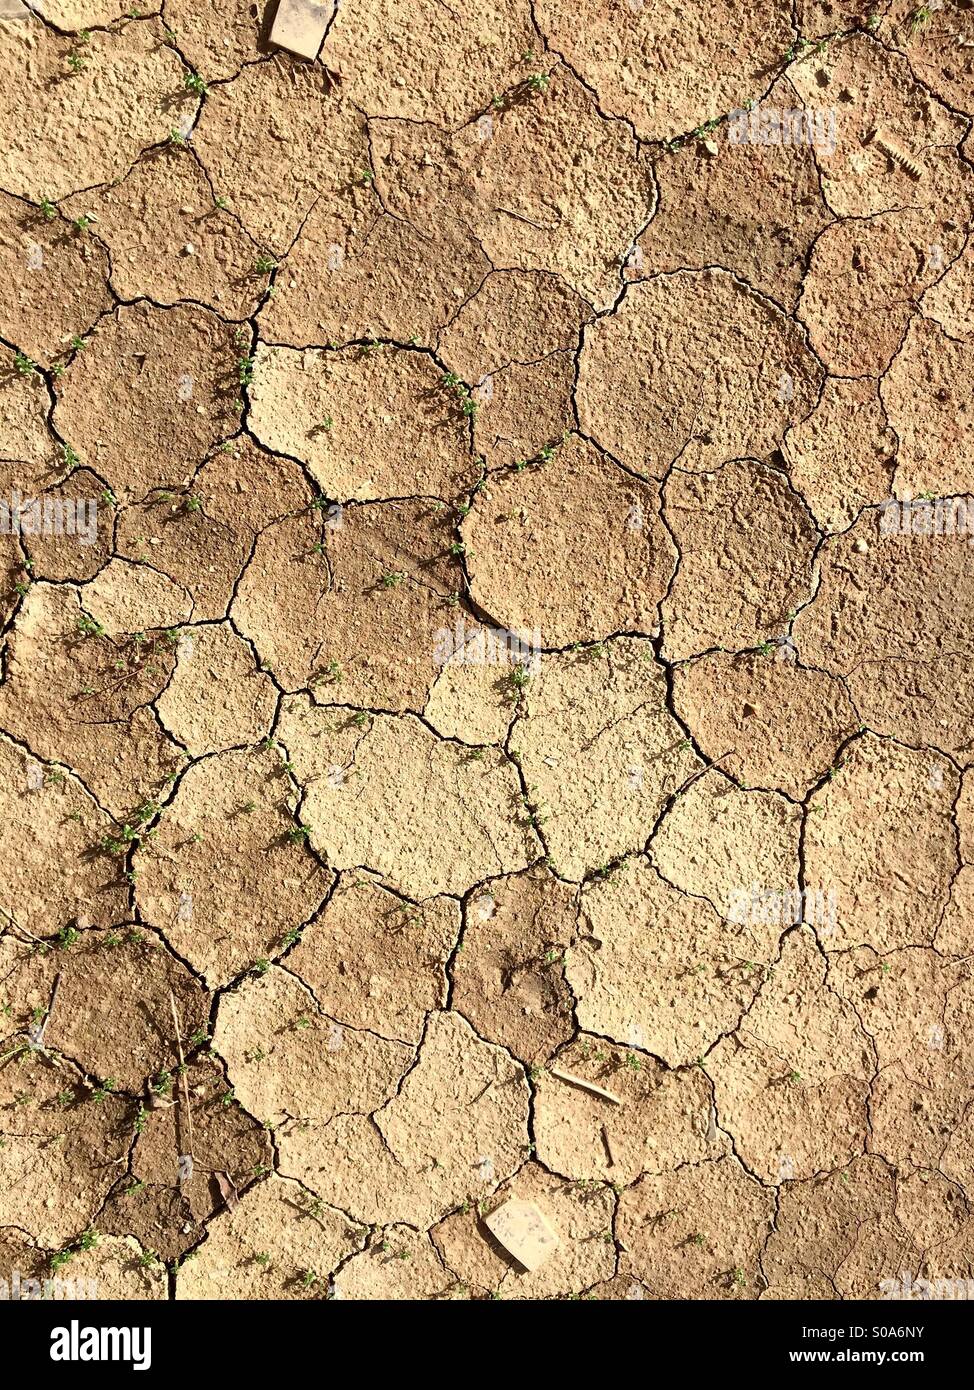 A patch of dry lake. Stock Photo